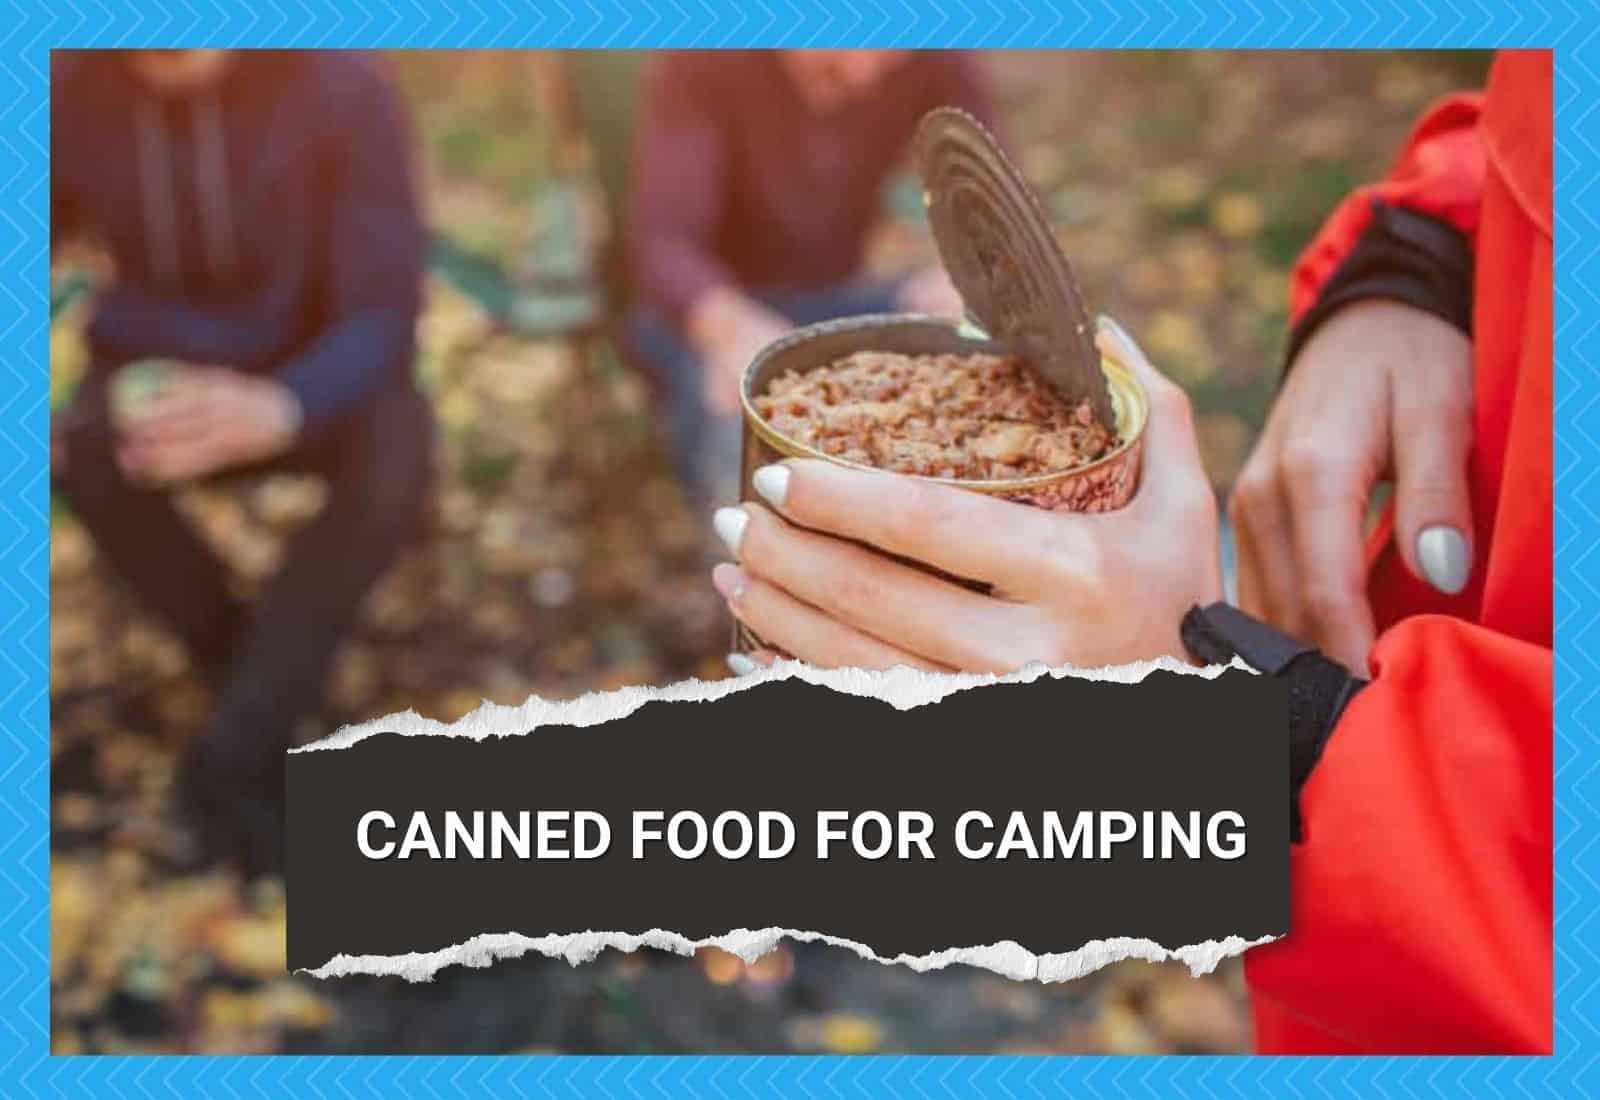 Canned Food For Camping